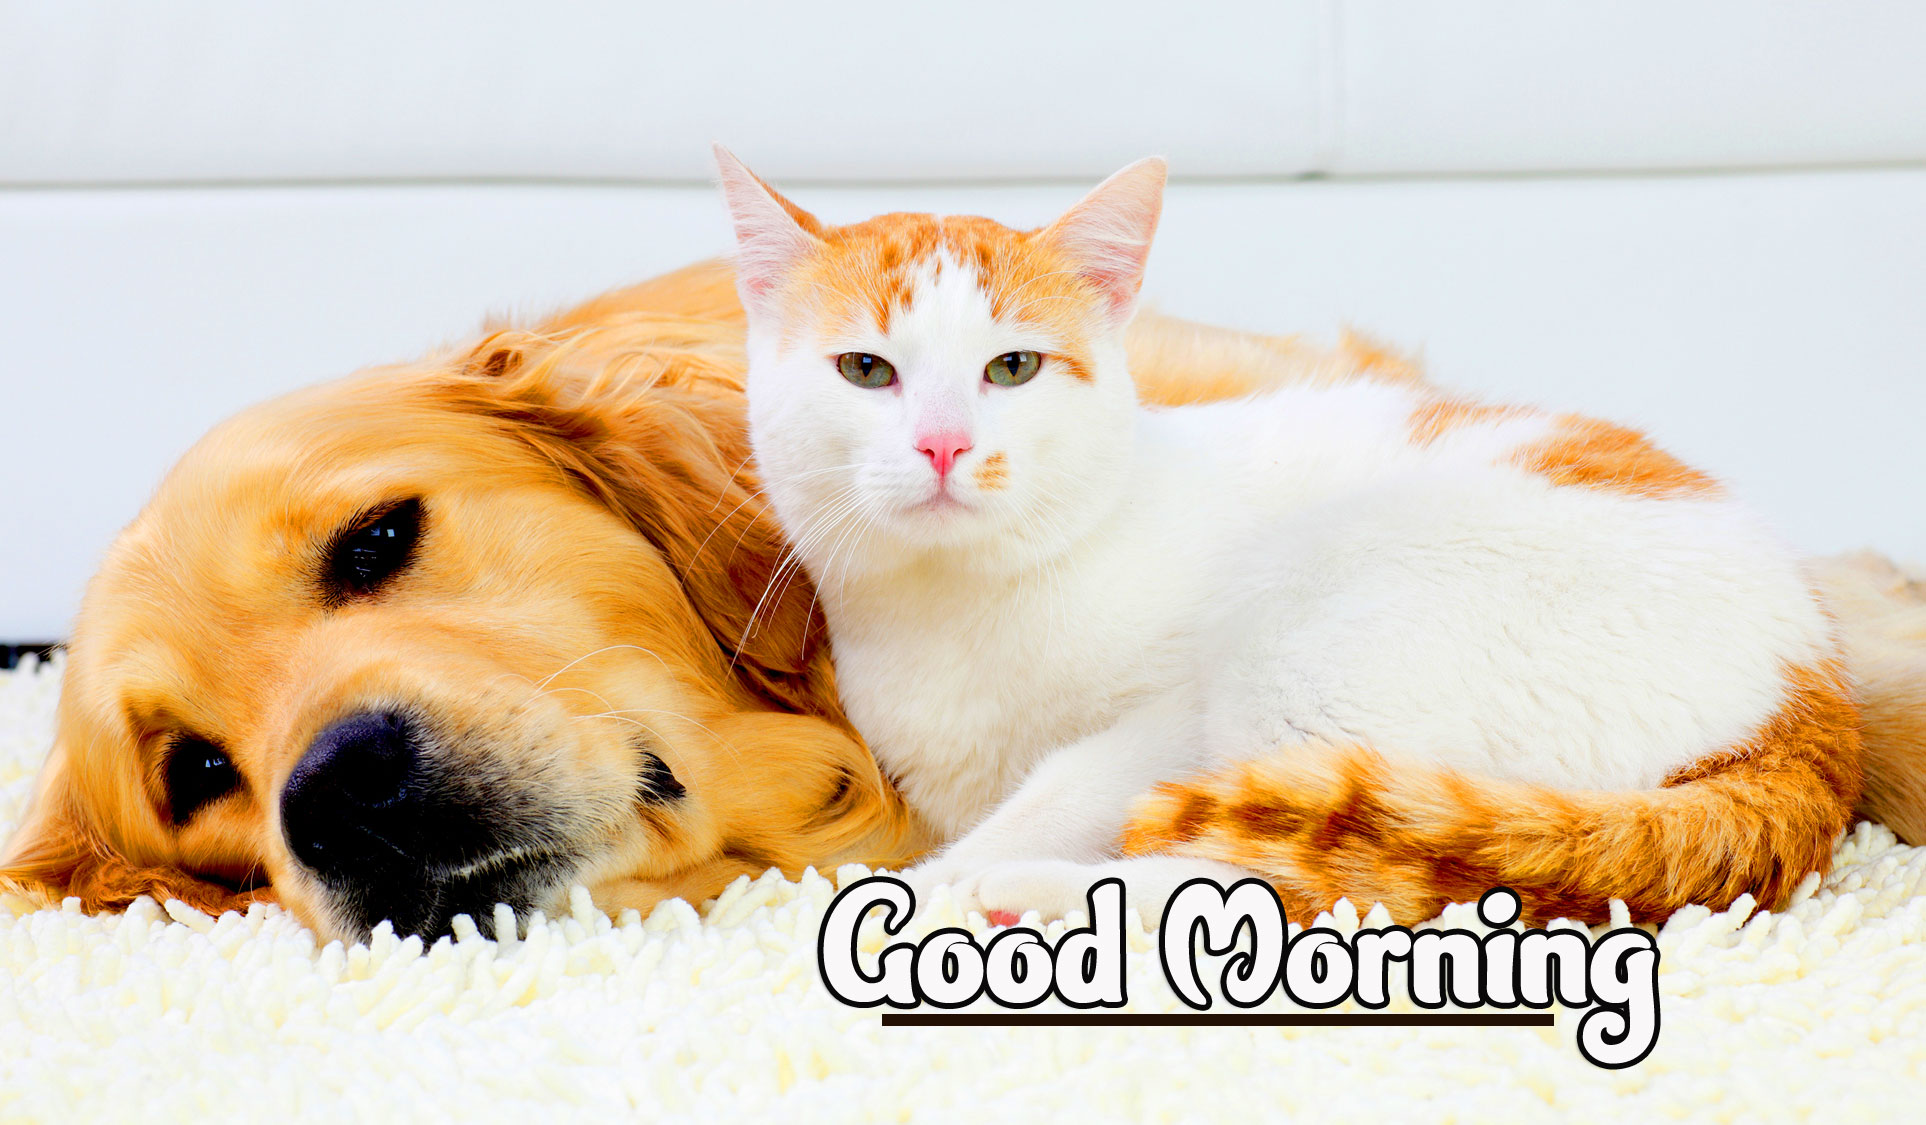 Animal Good morning Wishes Images Pics photo Download 